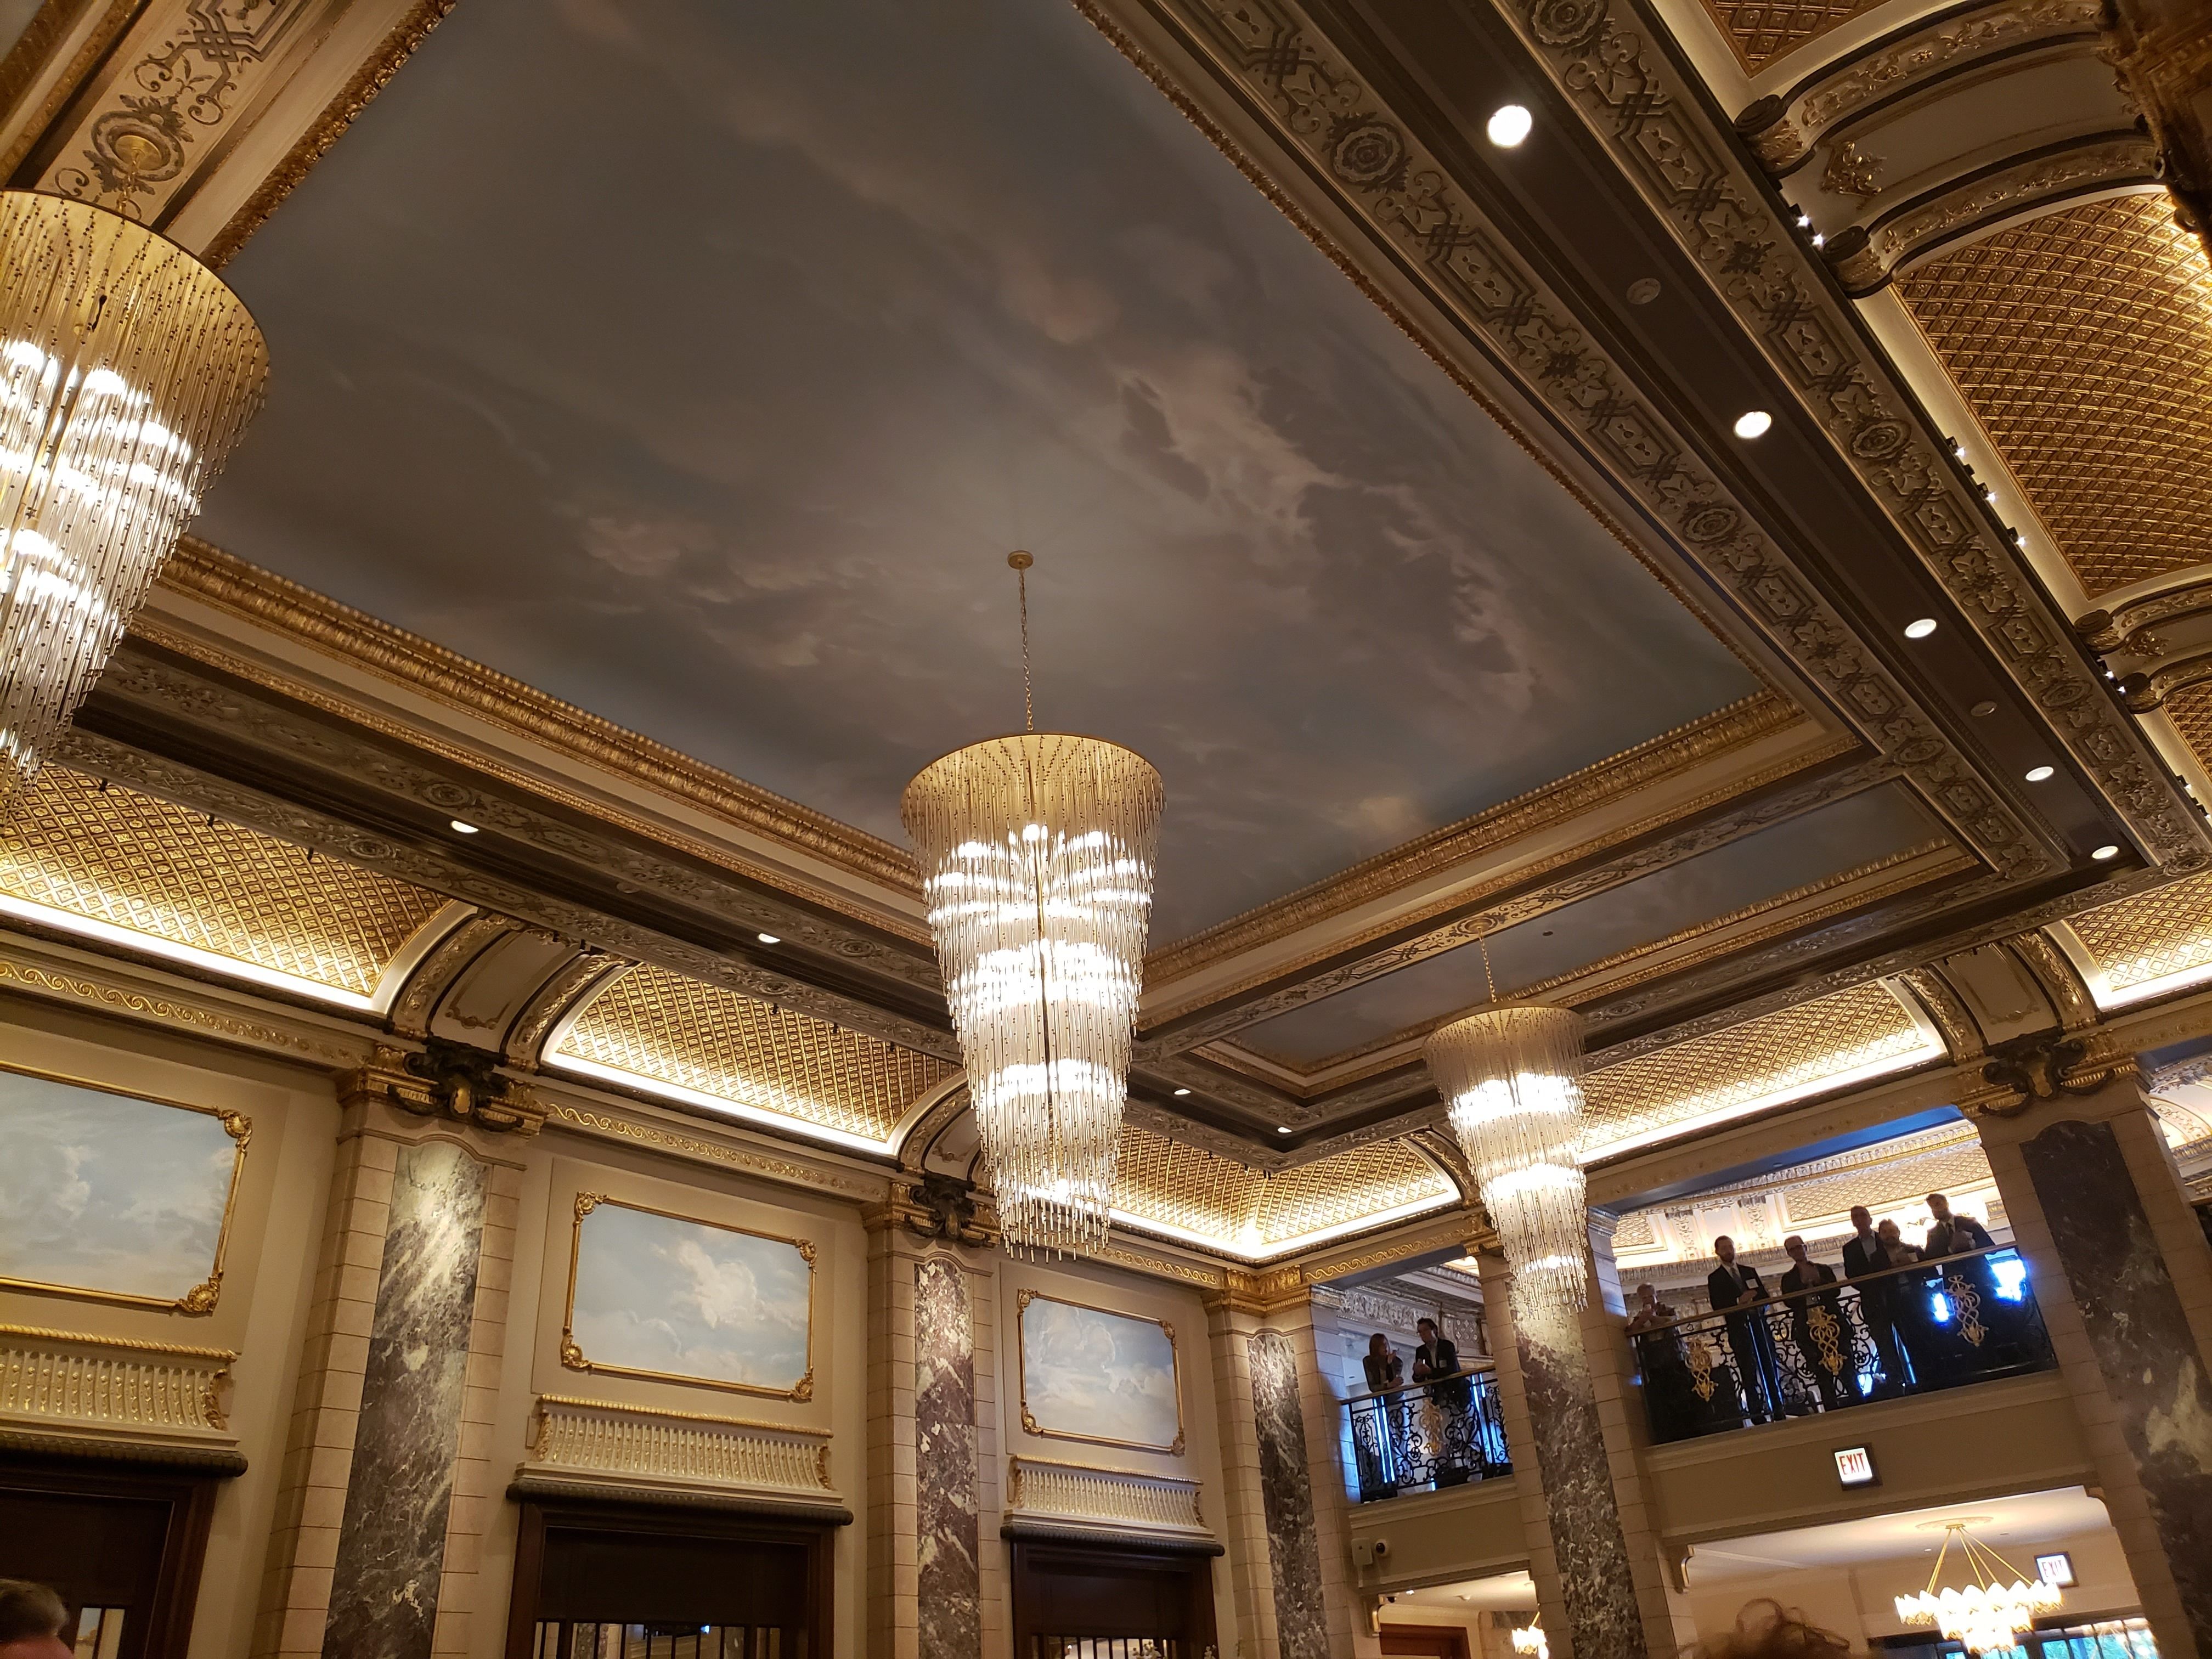 The gold gilded ceiling of the Belden-Stratford, with three large cascading chandeliers hanging.